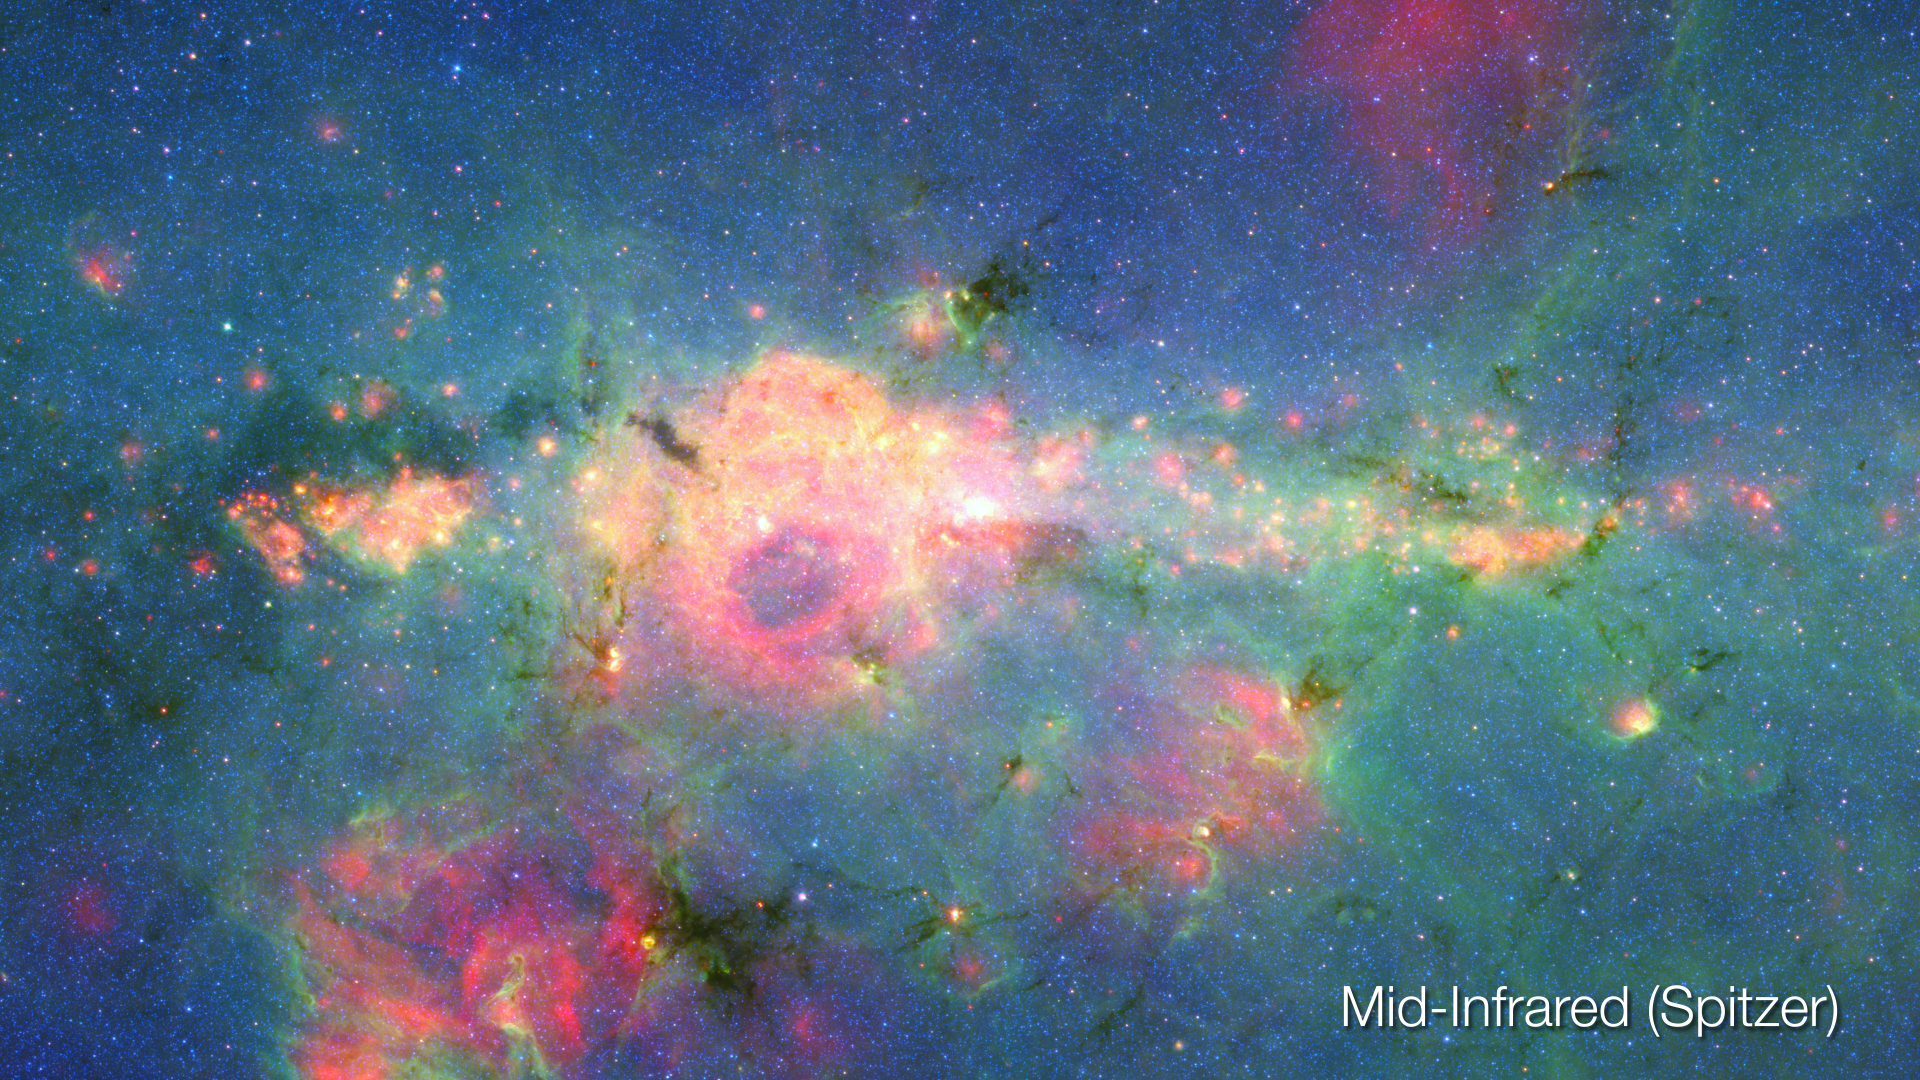 Preview Image for Galactic Center in Multiple Infrared Wavelengths